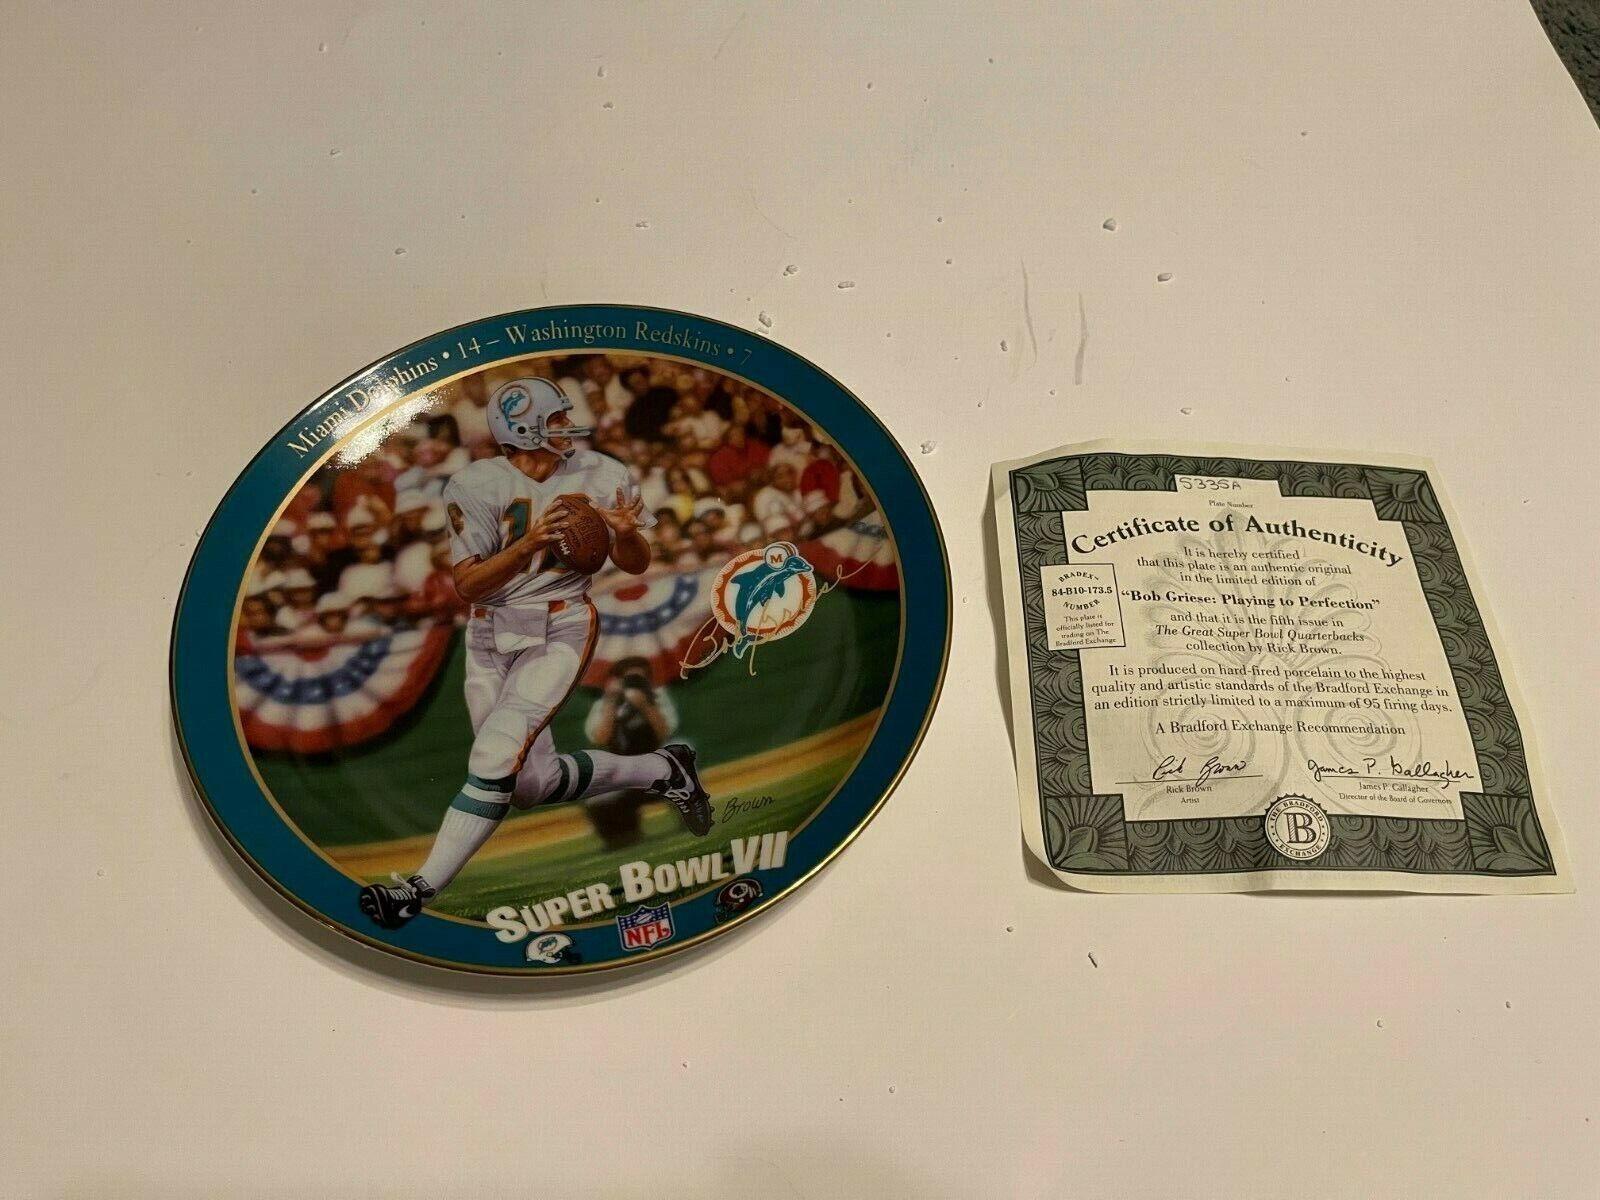 Bob Griese: Playing to Perfection by Rick Brown Collector Plate, Super Bowl 1995